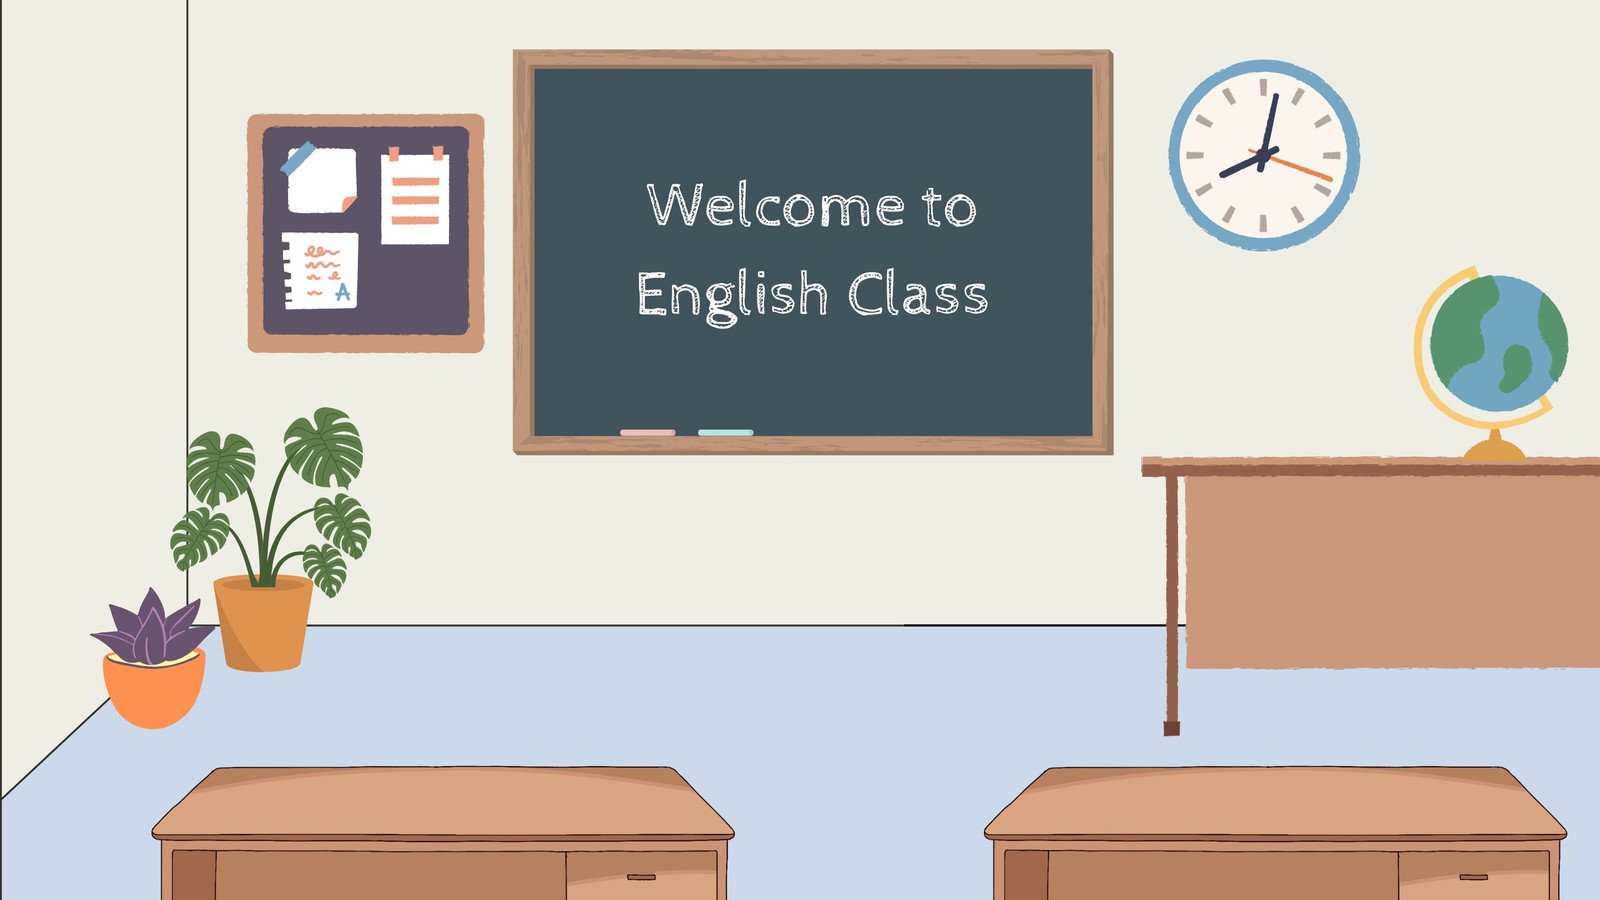 Customize 261+ Classroom Zoom Virtual Background Templates Online - Canva